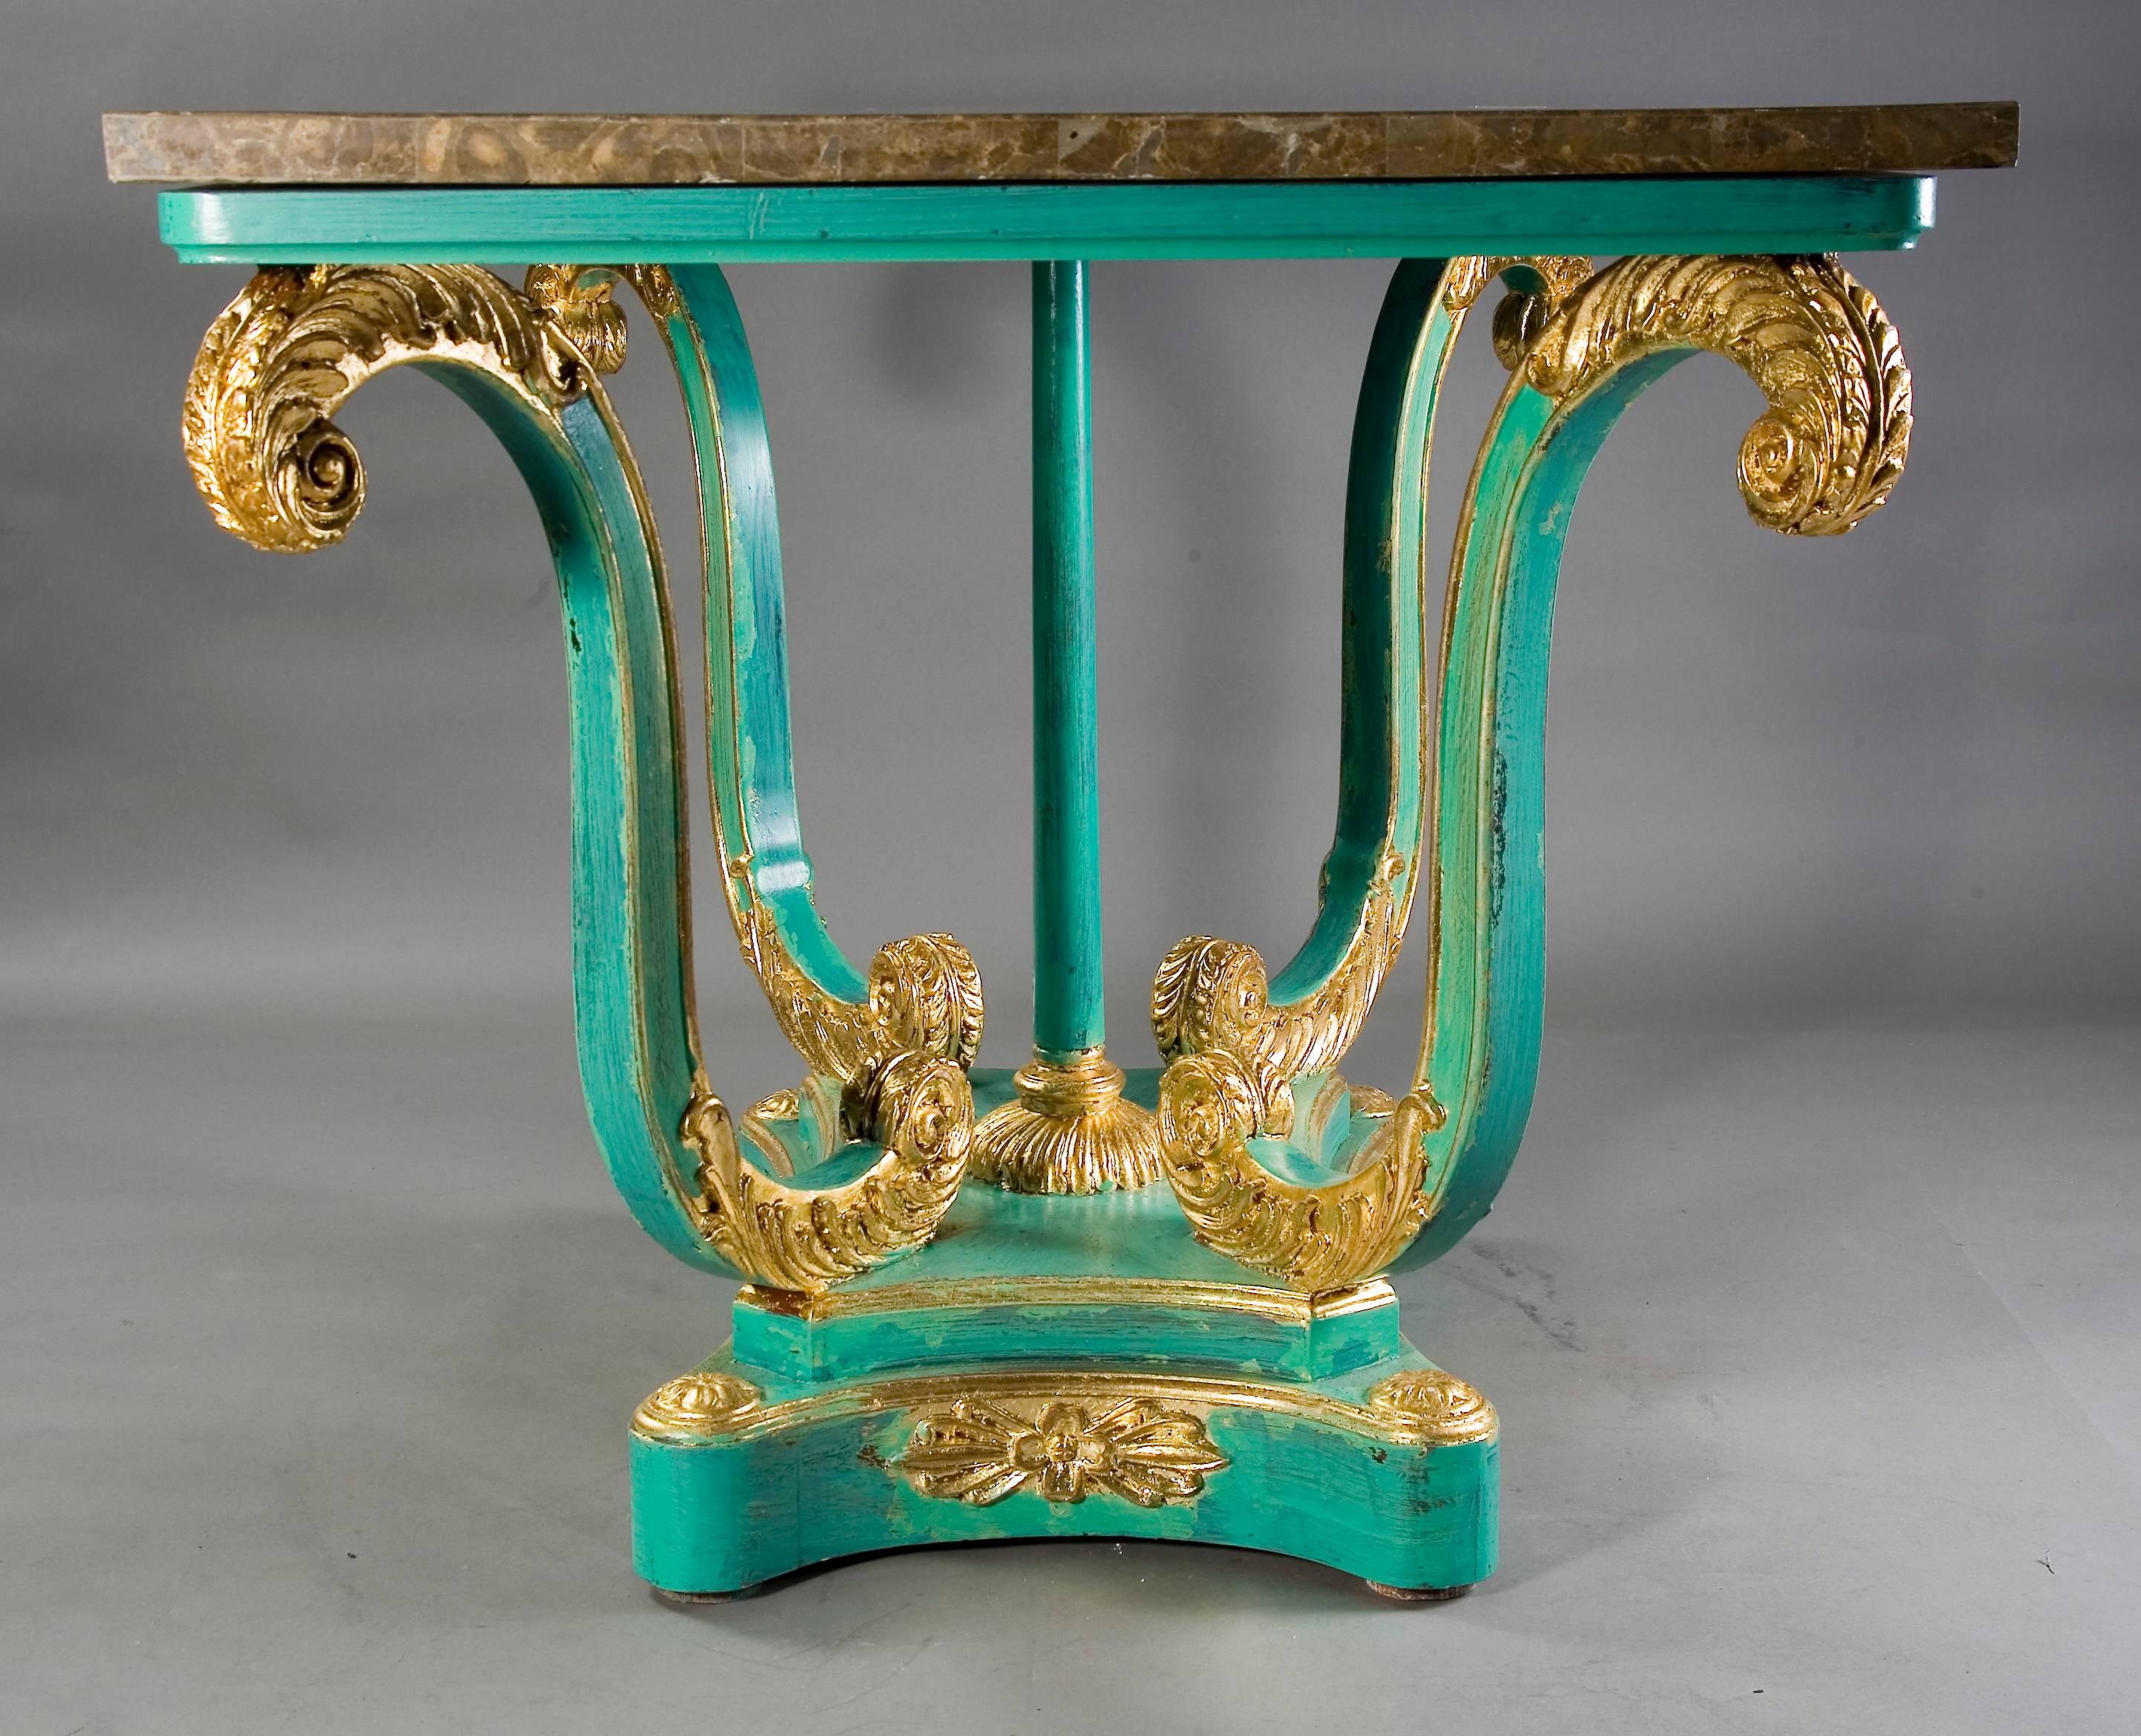 Solid beech wood, carved and turquoise colored and polished gold-plated. Square frame on S-shaped curved volutes. Centrally a column ending in a rosette-shaped base.
Four-sided base plate with classical decorations.

The unique Pietra, Dura